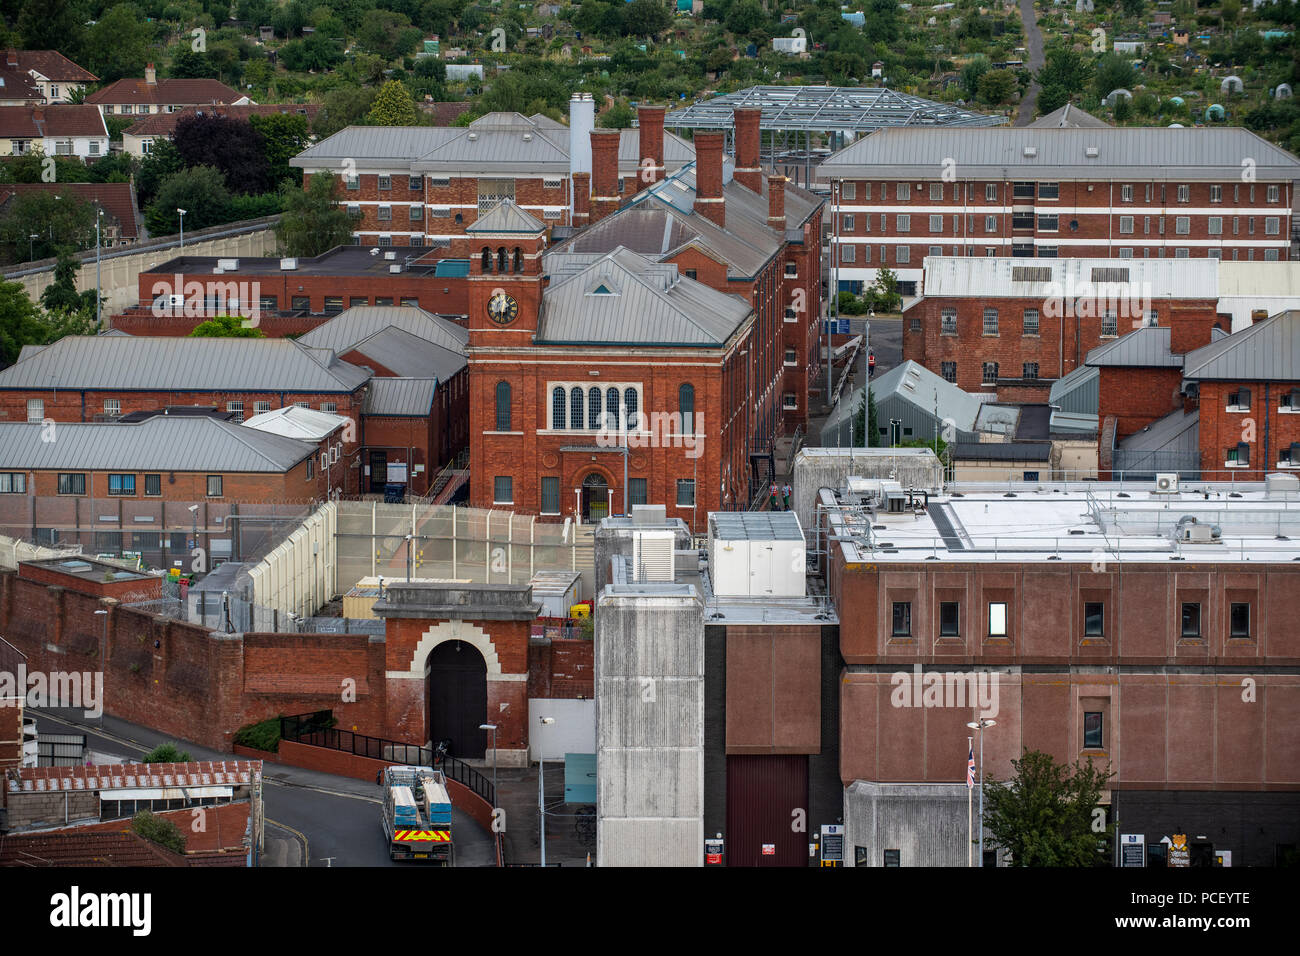 An aerial view of HM Prison Bristol. A category B men's prison, located in the Horfield area of Bristol. Stock Photo